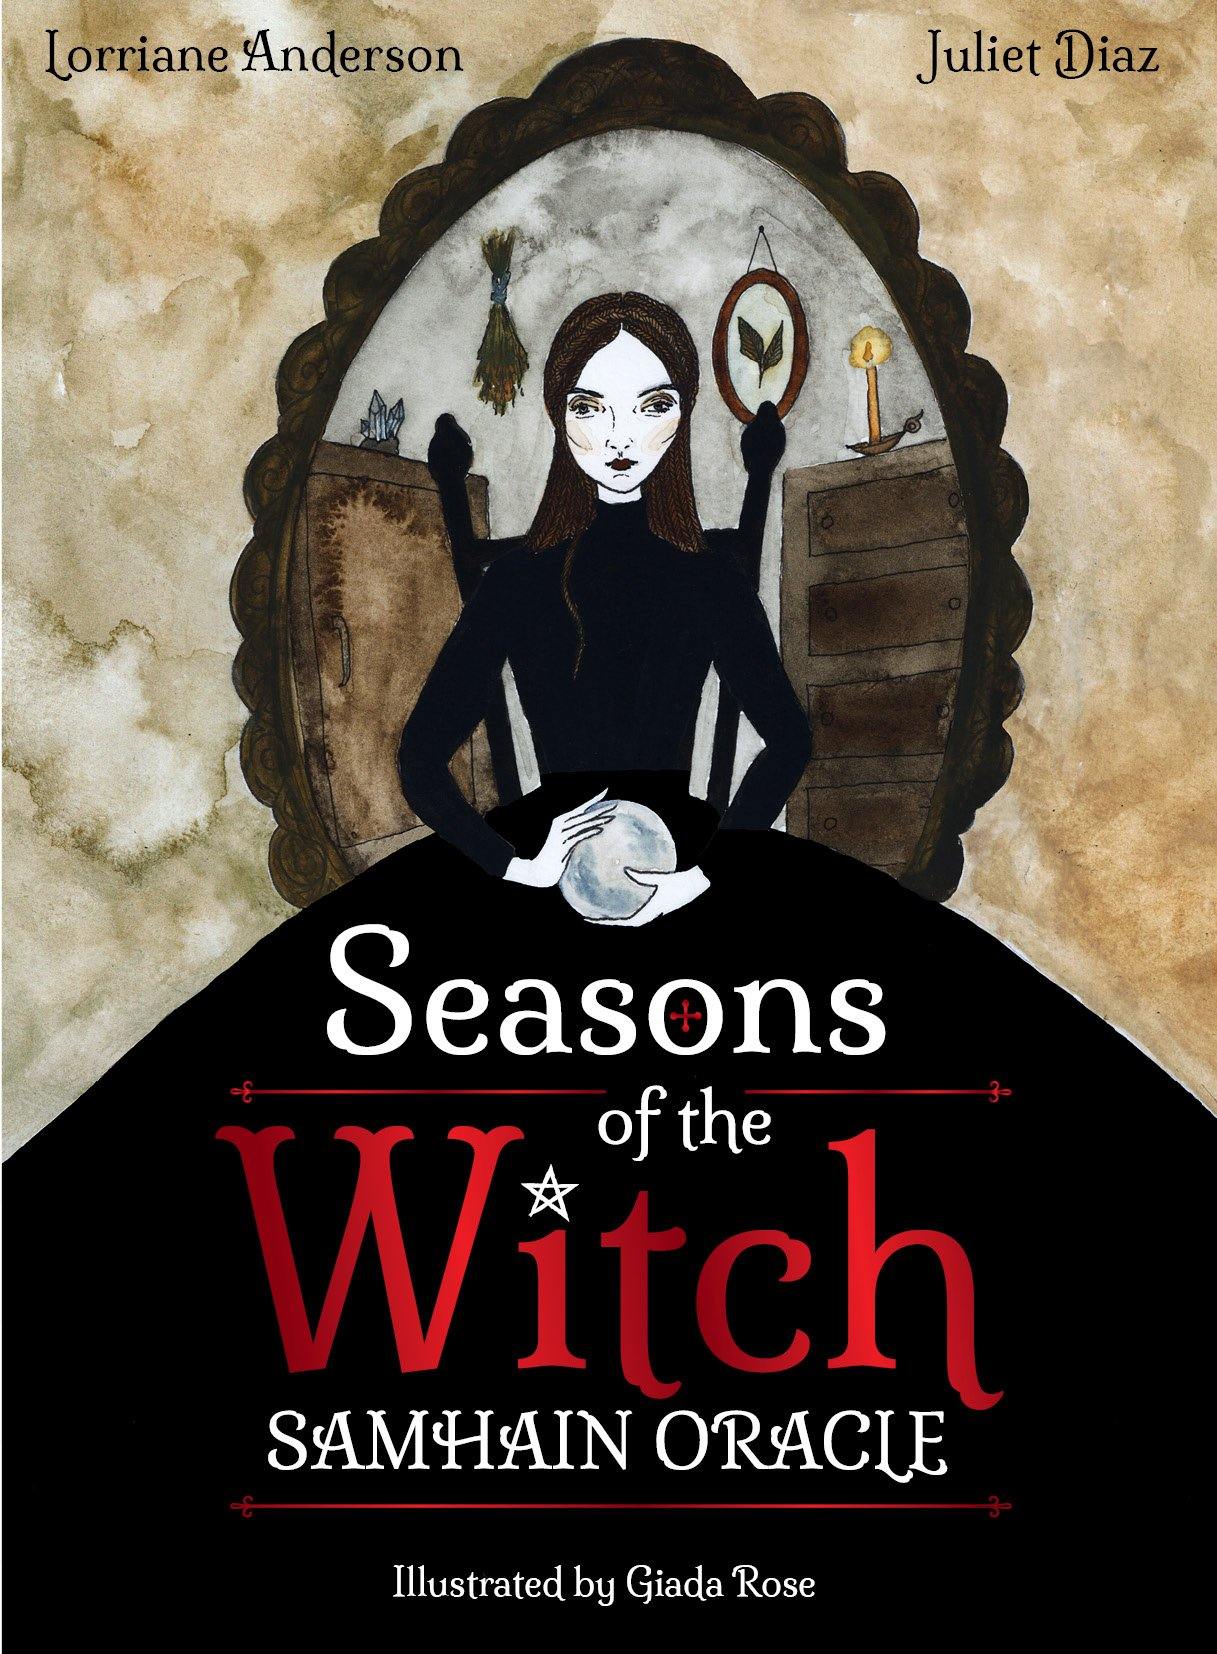 Seasons of the Witch - Samhain Oracle, Lorraine Anderson & Juliet Diaz - JOURNEY artisan soaps & candles